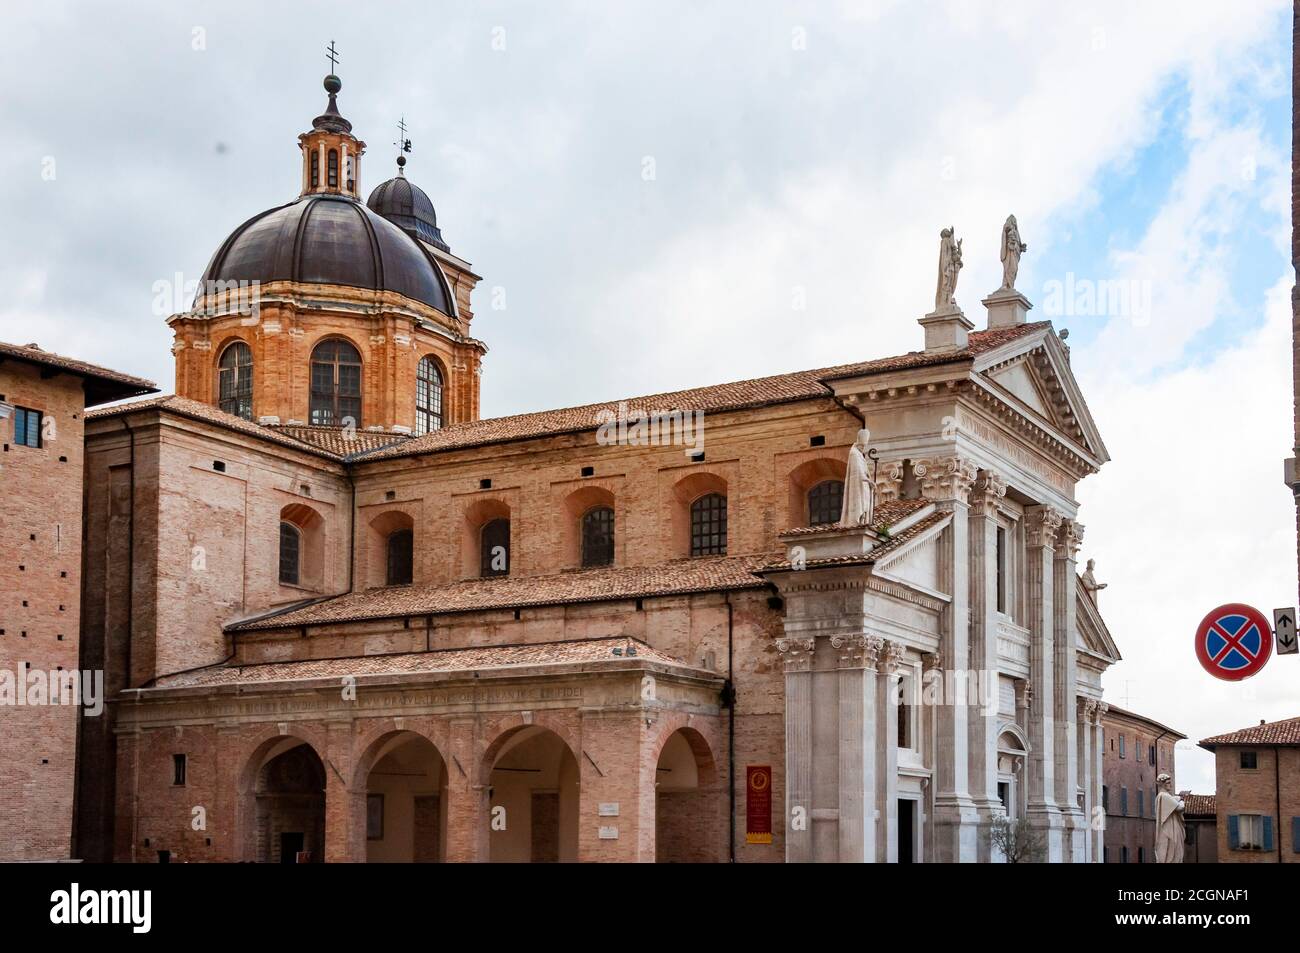 View of the facade and the cupola of the neoclassical Duomo di Urbino, Urbino Cathedral in the Marche, Italy. Stock Photo